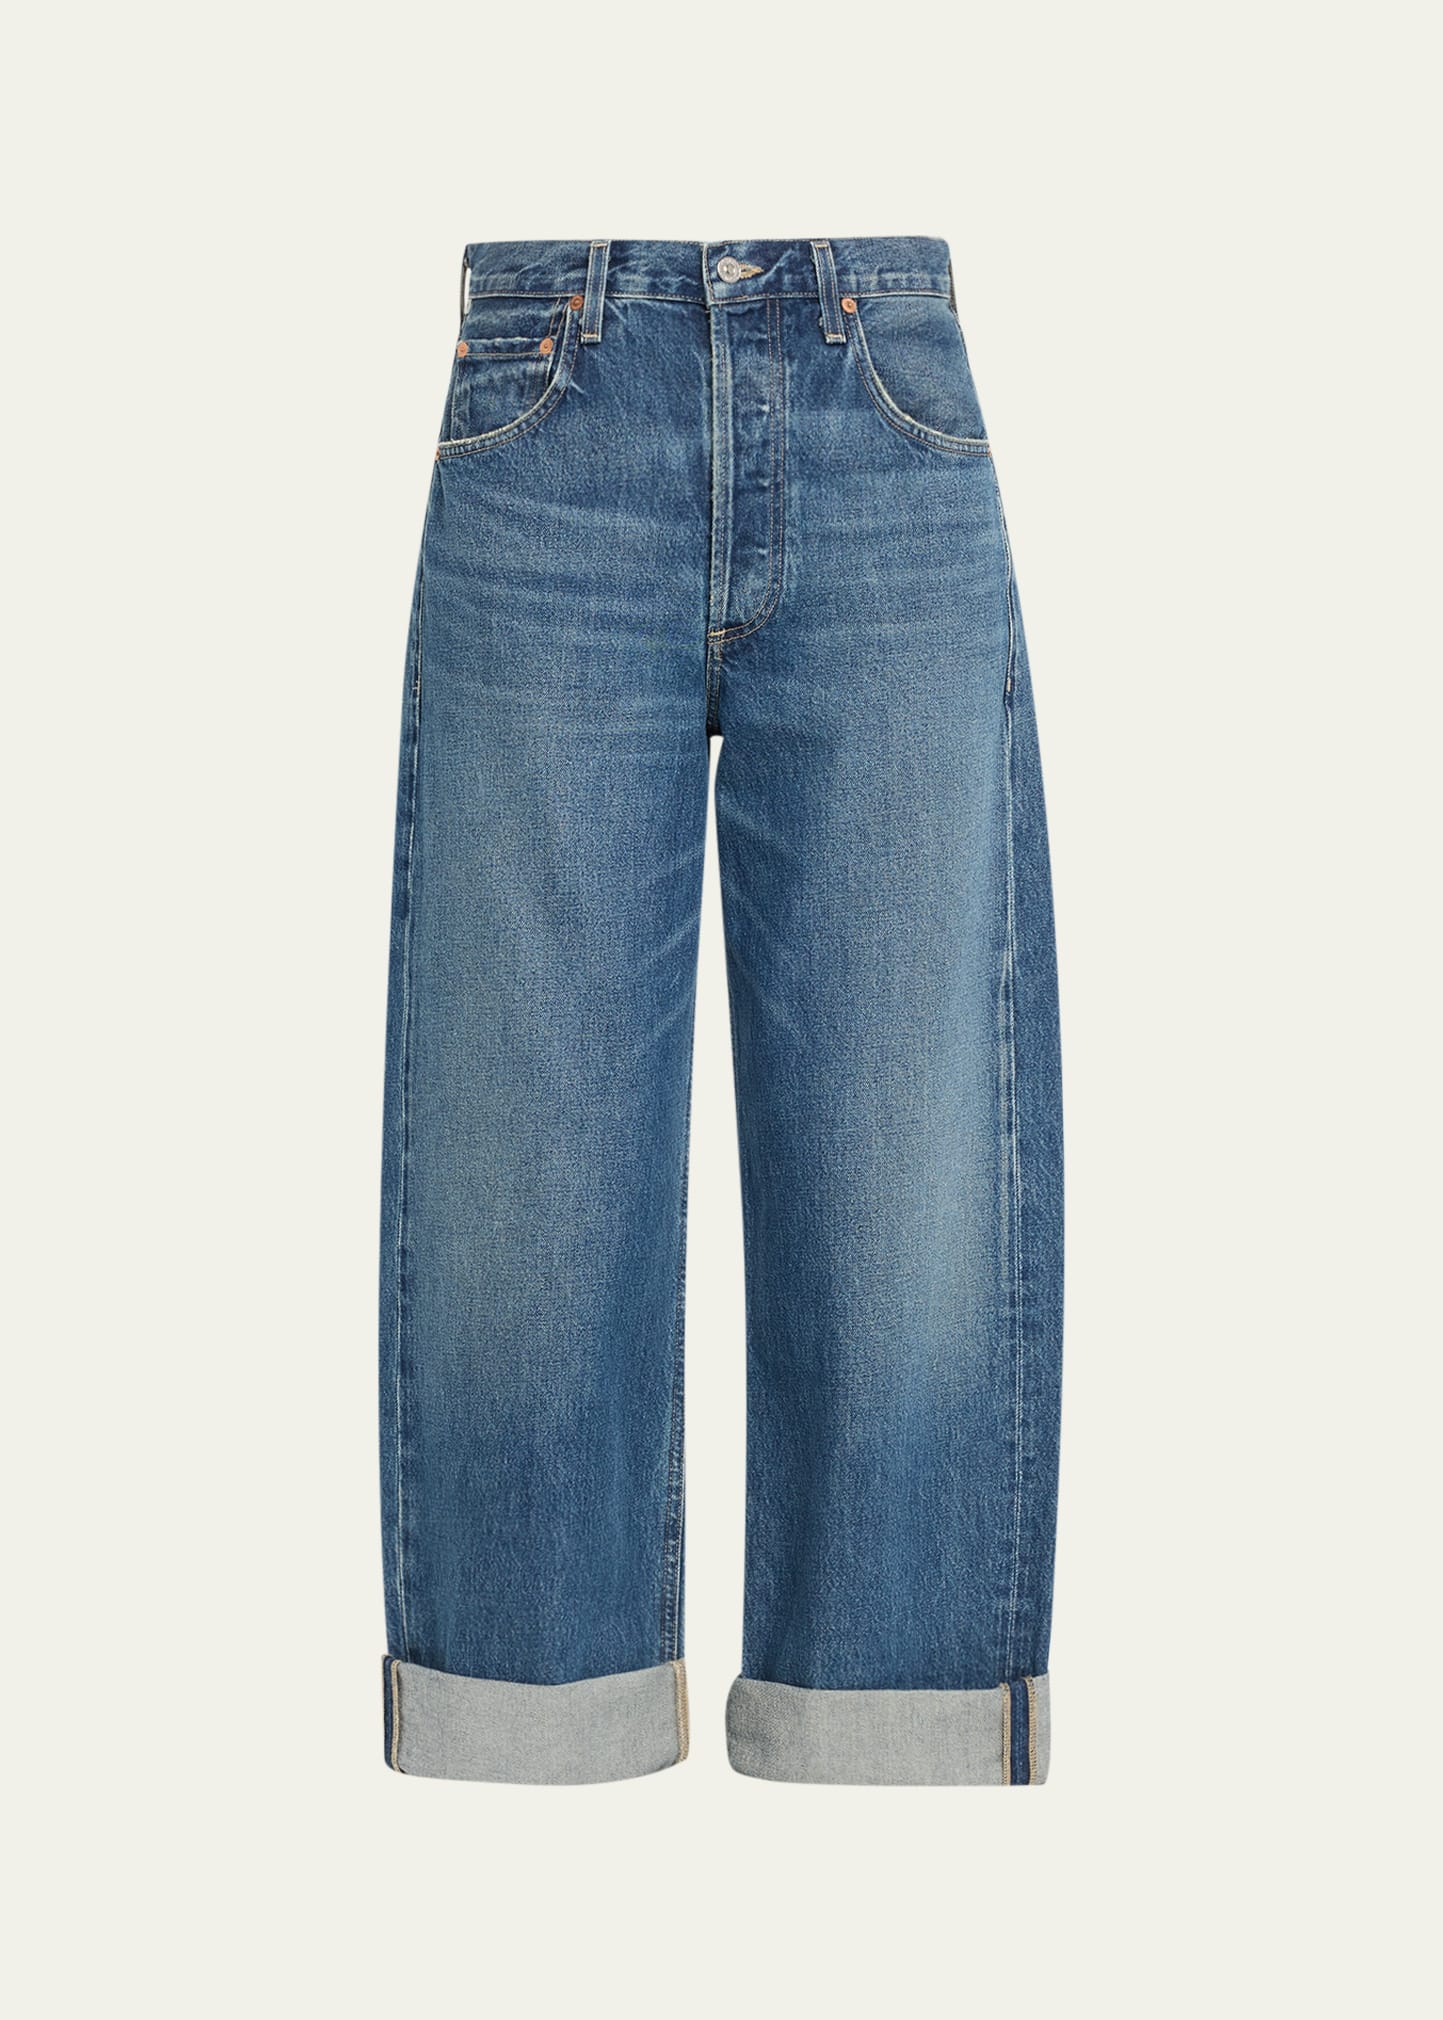 Citizens Of Humanity Lilah Wide Cuffed Jeans In Provance Dk In